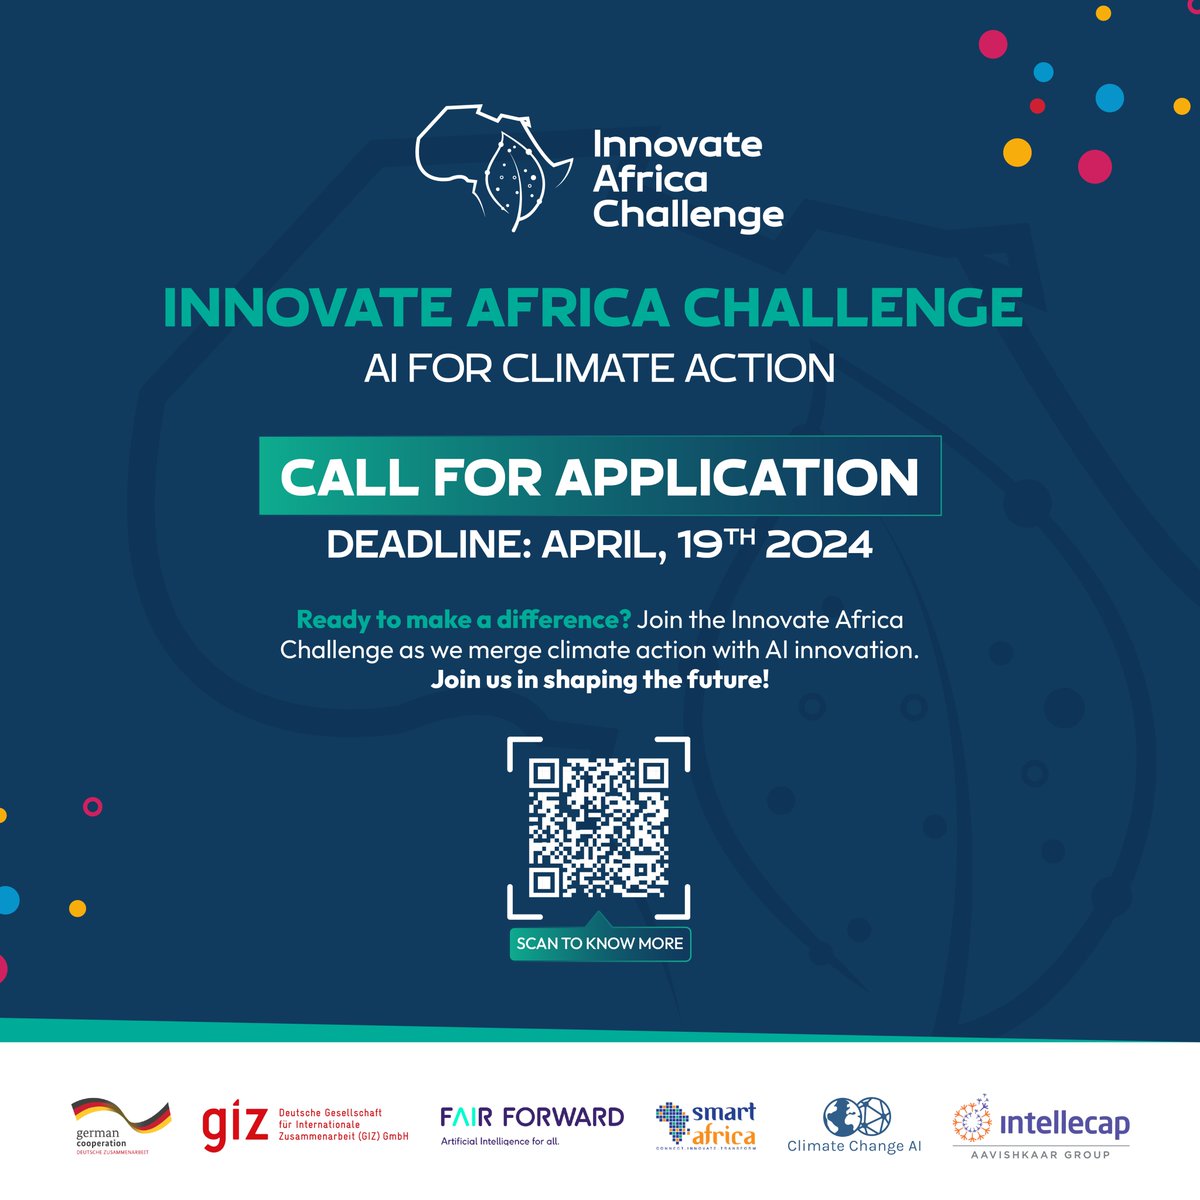 Great opportunity! Call for Proposals - 'Innovate Africa Challenge' Theme: Advancing #AI for #ClimateAction! Apply here: smartafrica.org/innovate-afric……… @RealSmartAfrica @giz_gmbh @fair_forward @IntellecapTweet @ClimateChangeAI